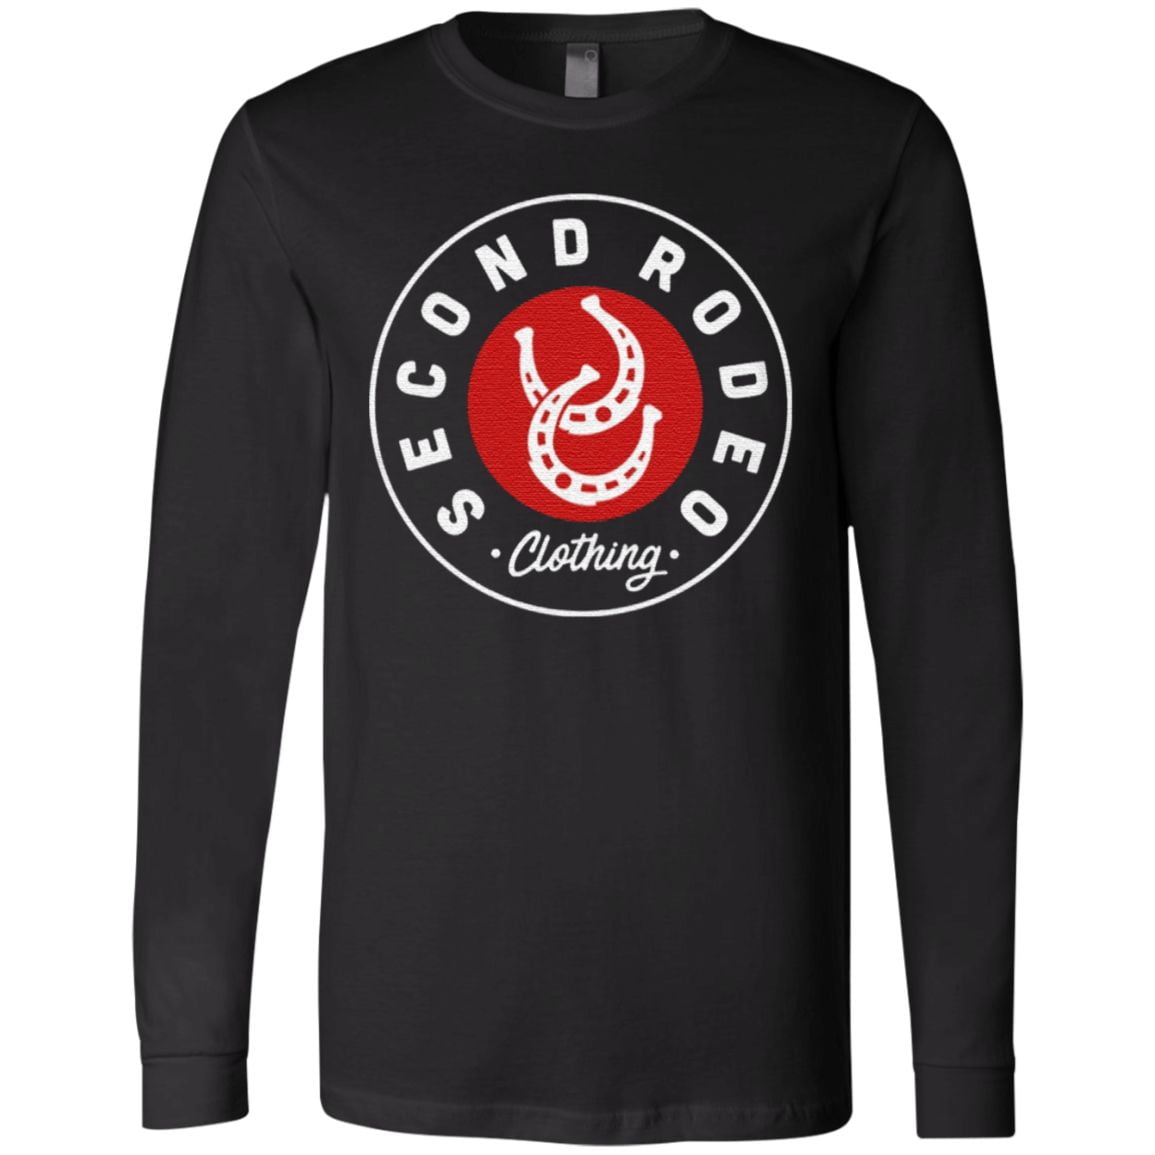 secondrodeo clothing t shirt